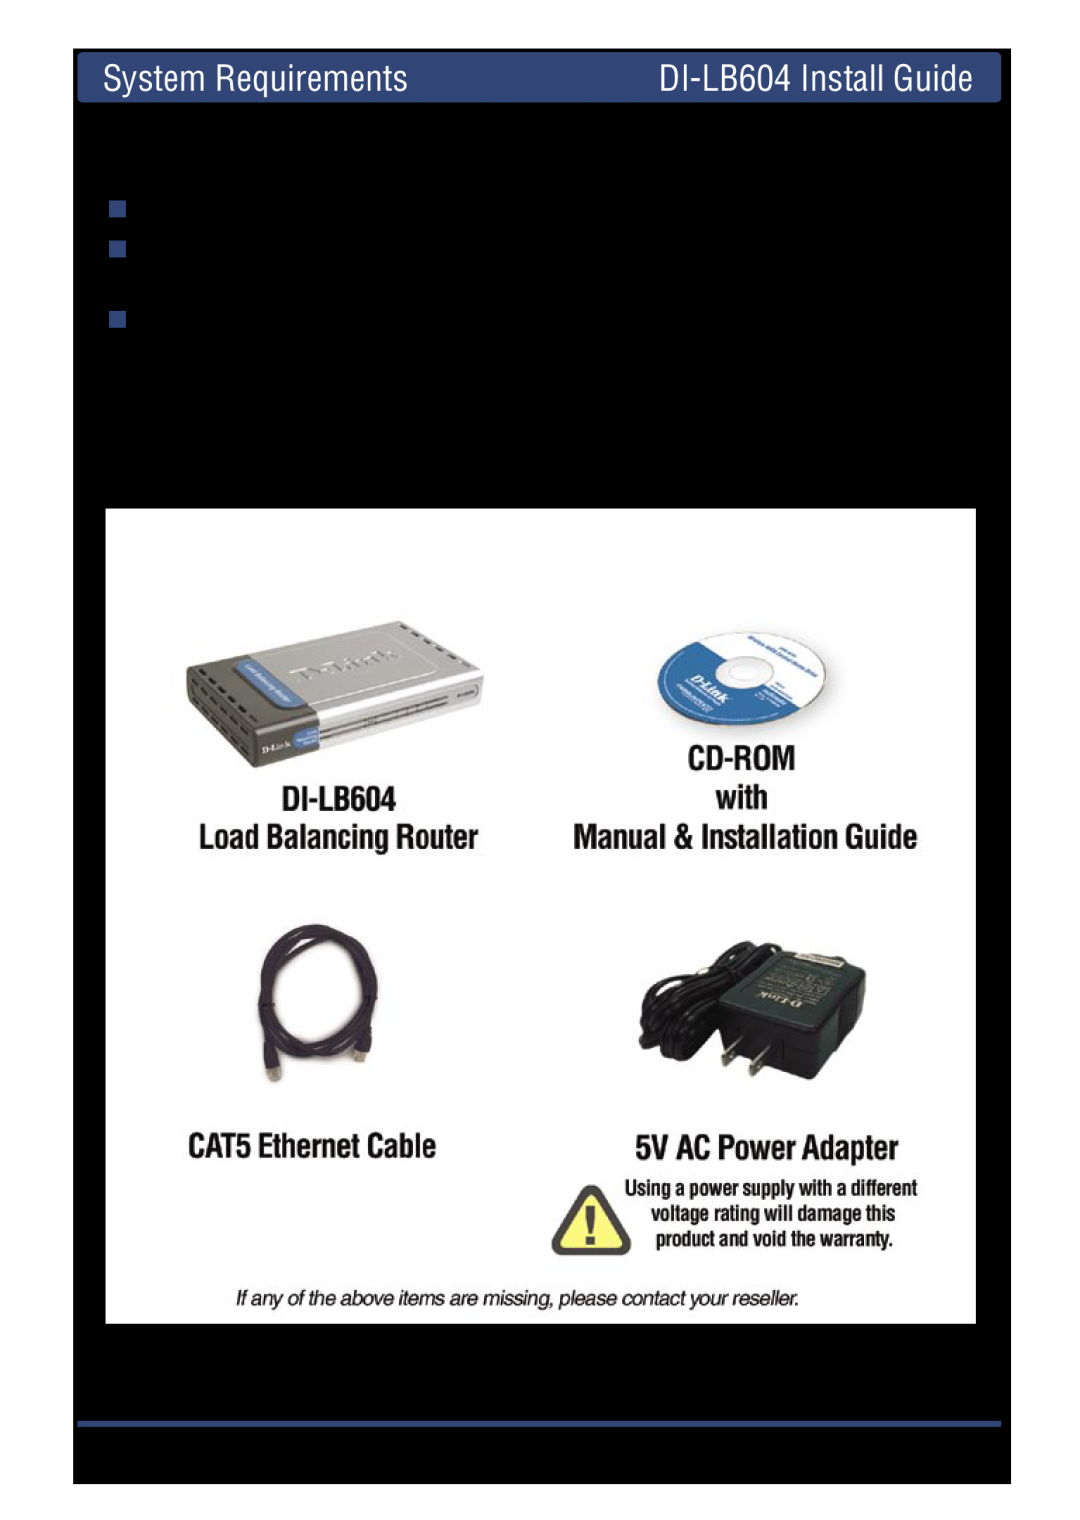 D-Link manual System Requirements, Package Contents, DI-LB604 Install Guide, D-Link Systems, Inc 